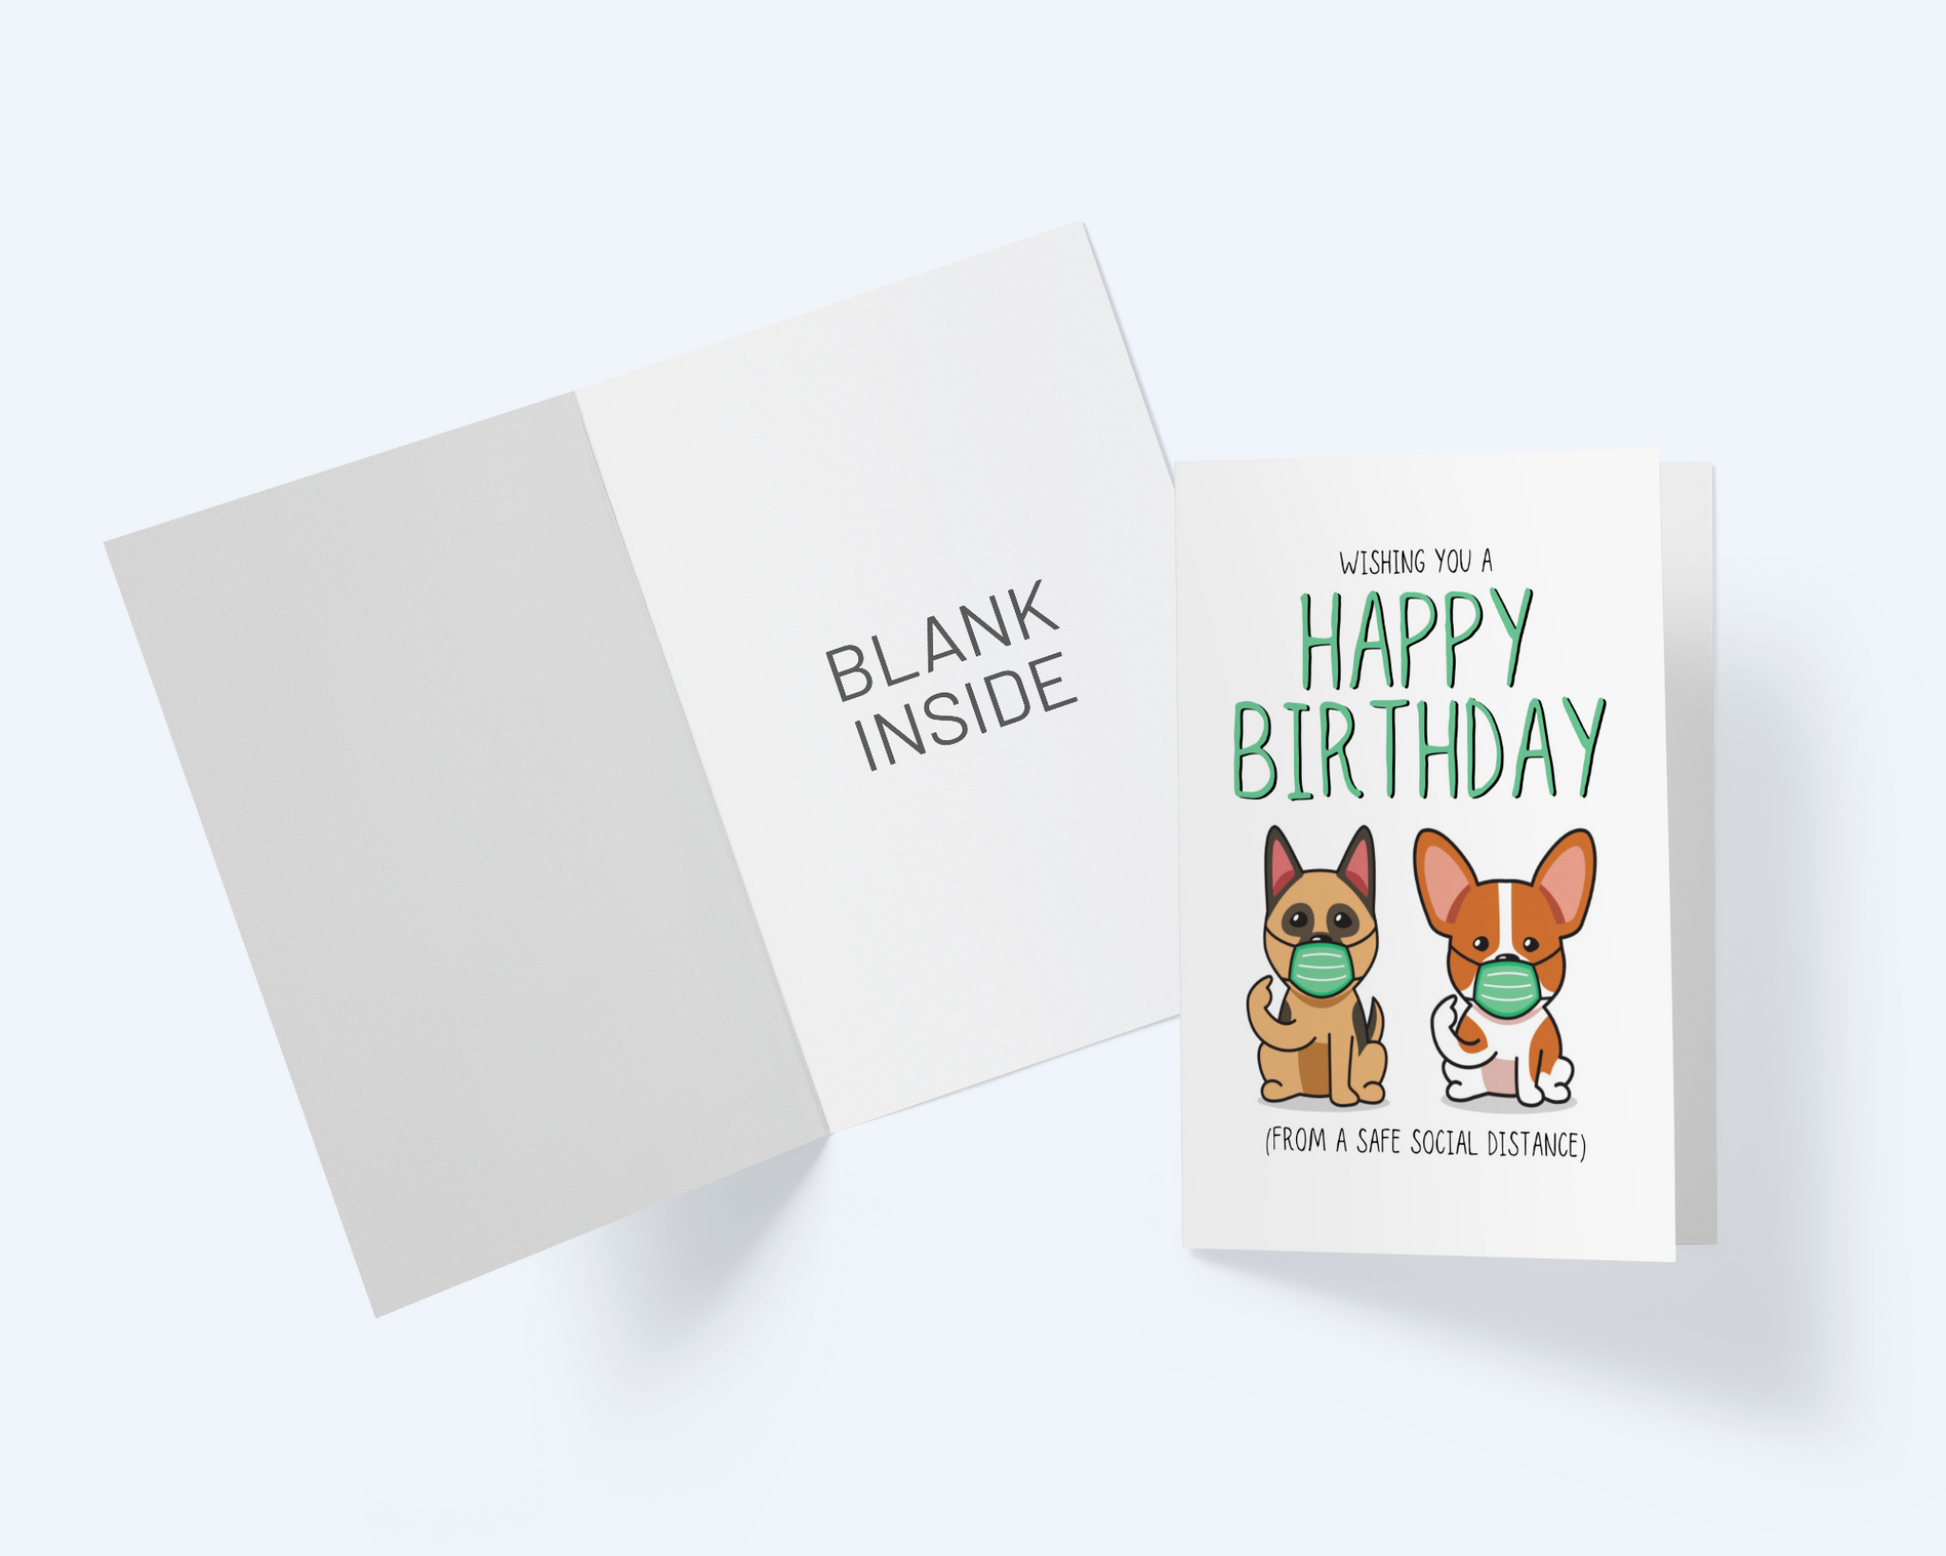 Wishing You A Happy Birthday - From A Distance - Greeting Card, Birthday Note Card.